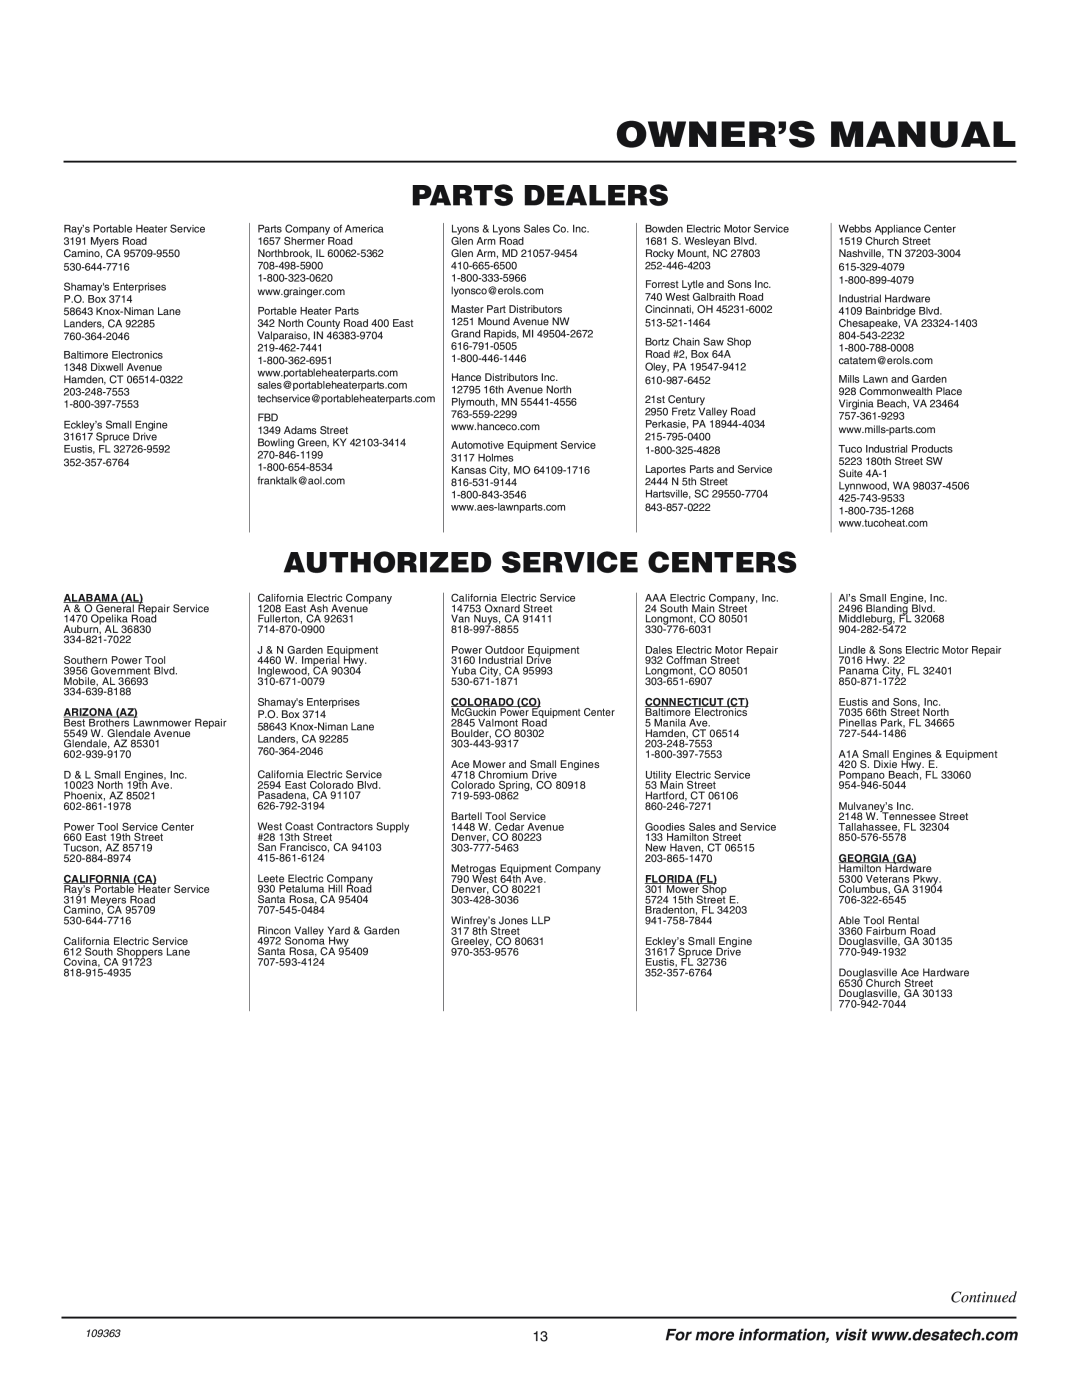 Remington 109312-01 owner manual Parts Dealers, Authorized Service Centers, Owner’S Manual, Continued, 109363 